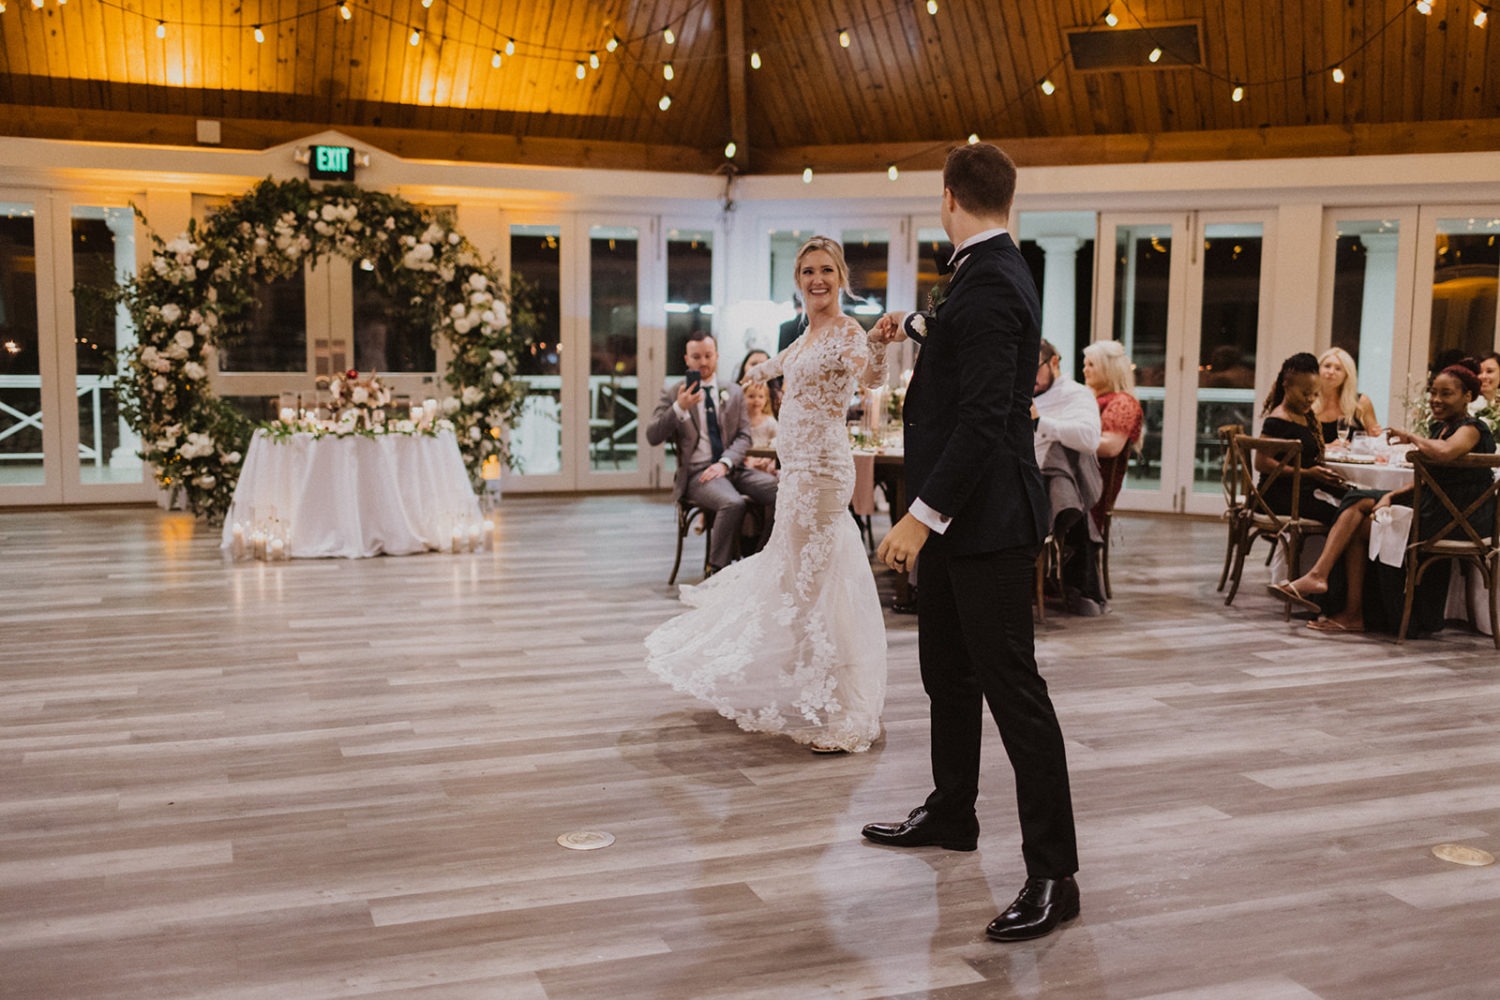 Couple ha first dance during wedding reception